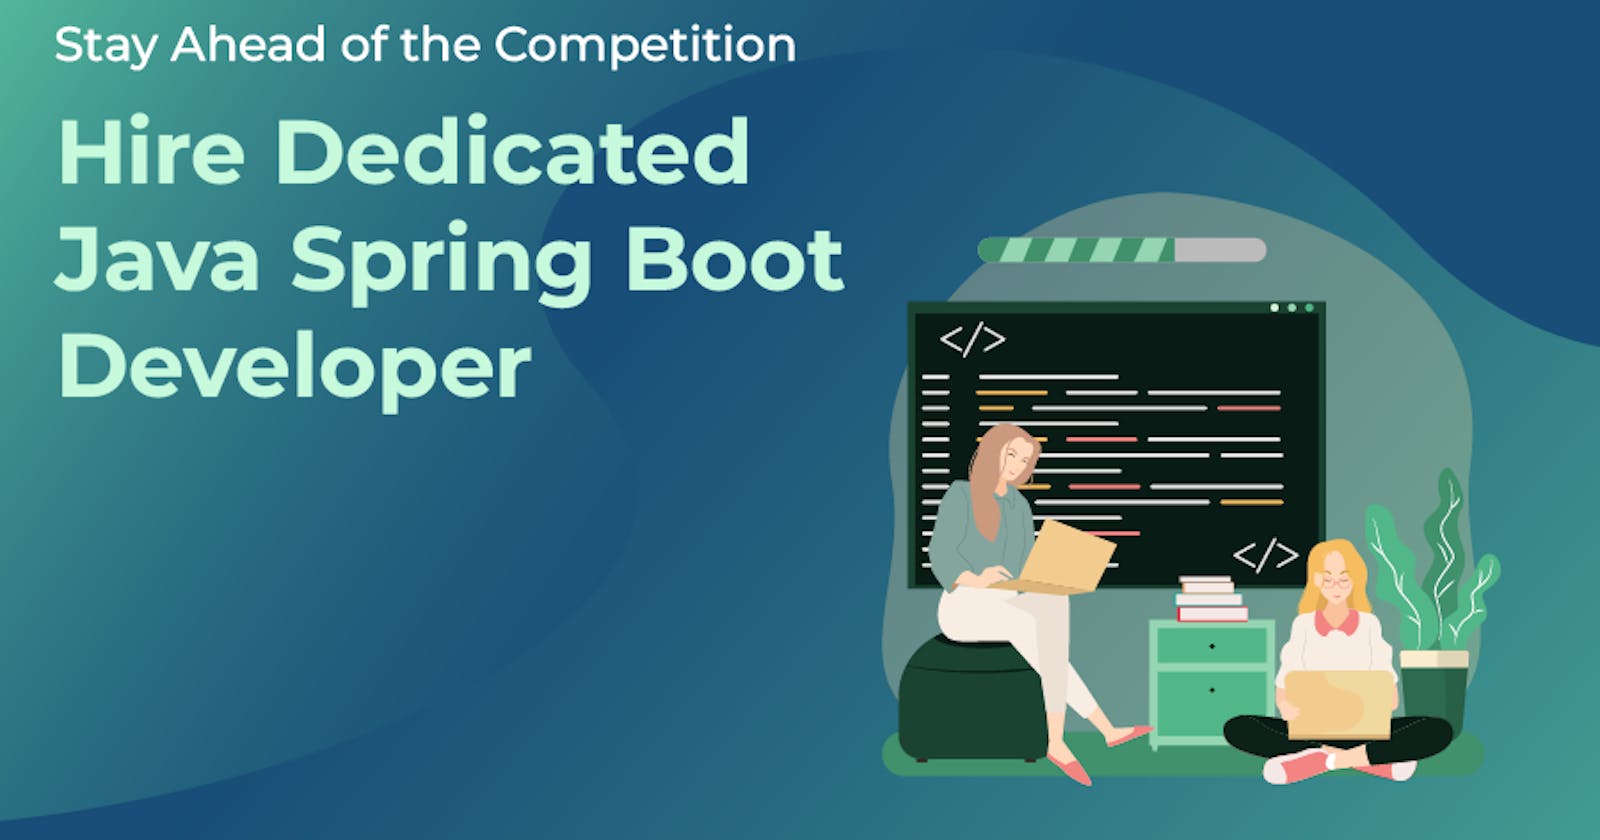 Stay Ahead of the Competition: Hire Dedicated Java Spring Boot Developer